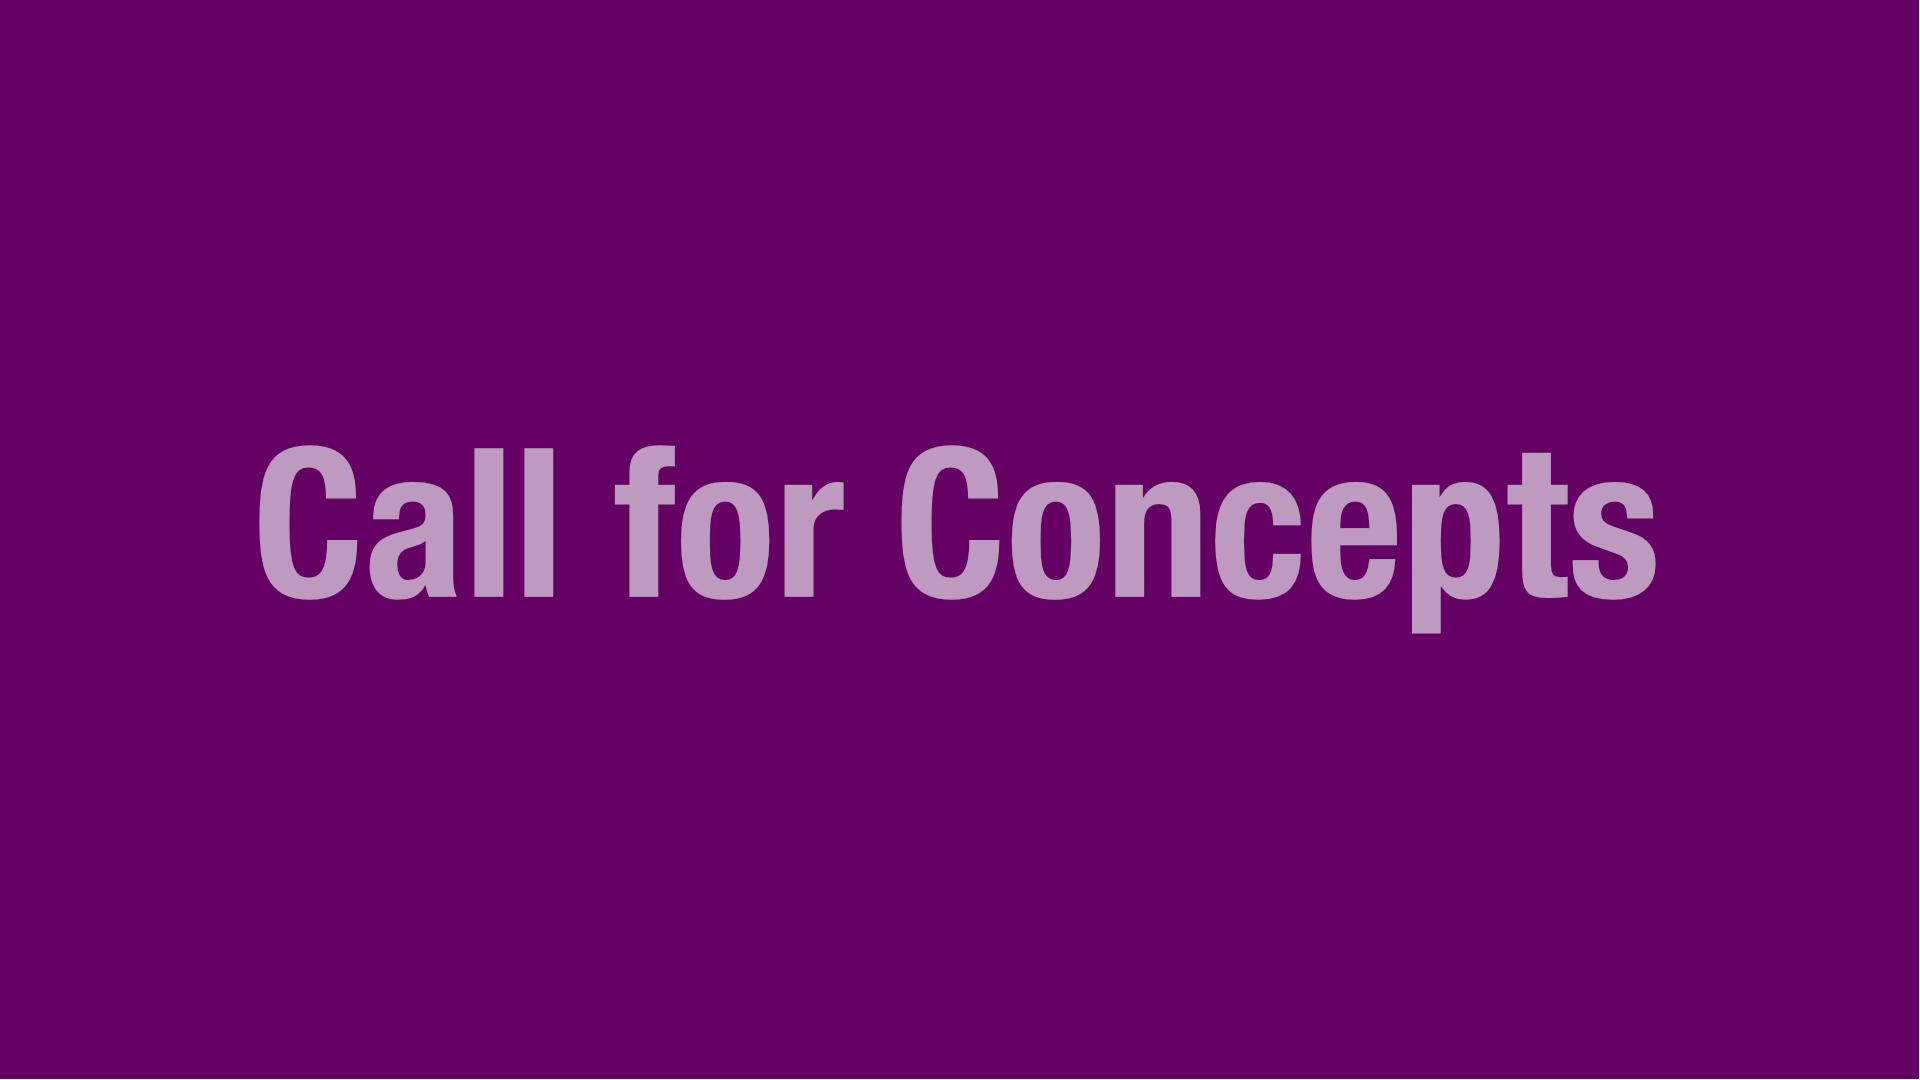 Call for Concepts